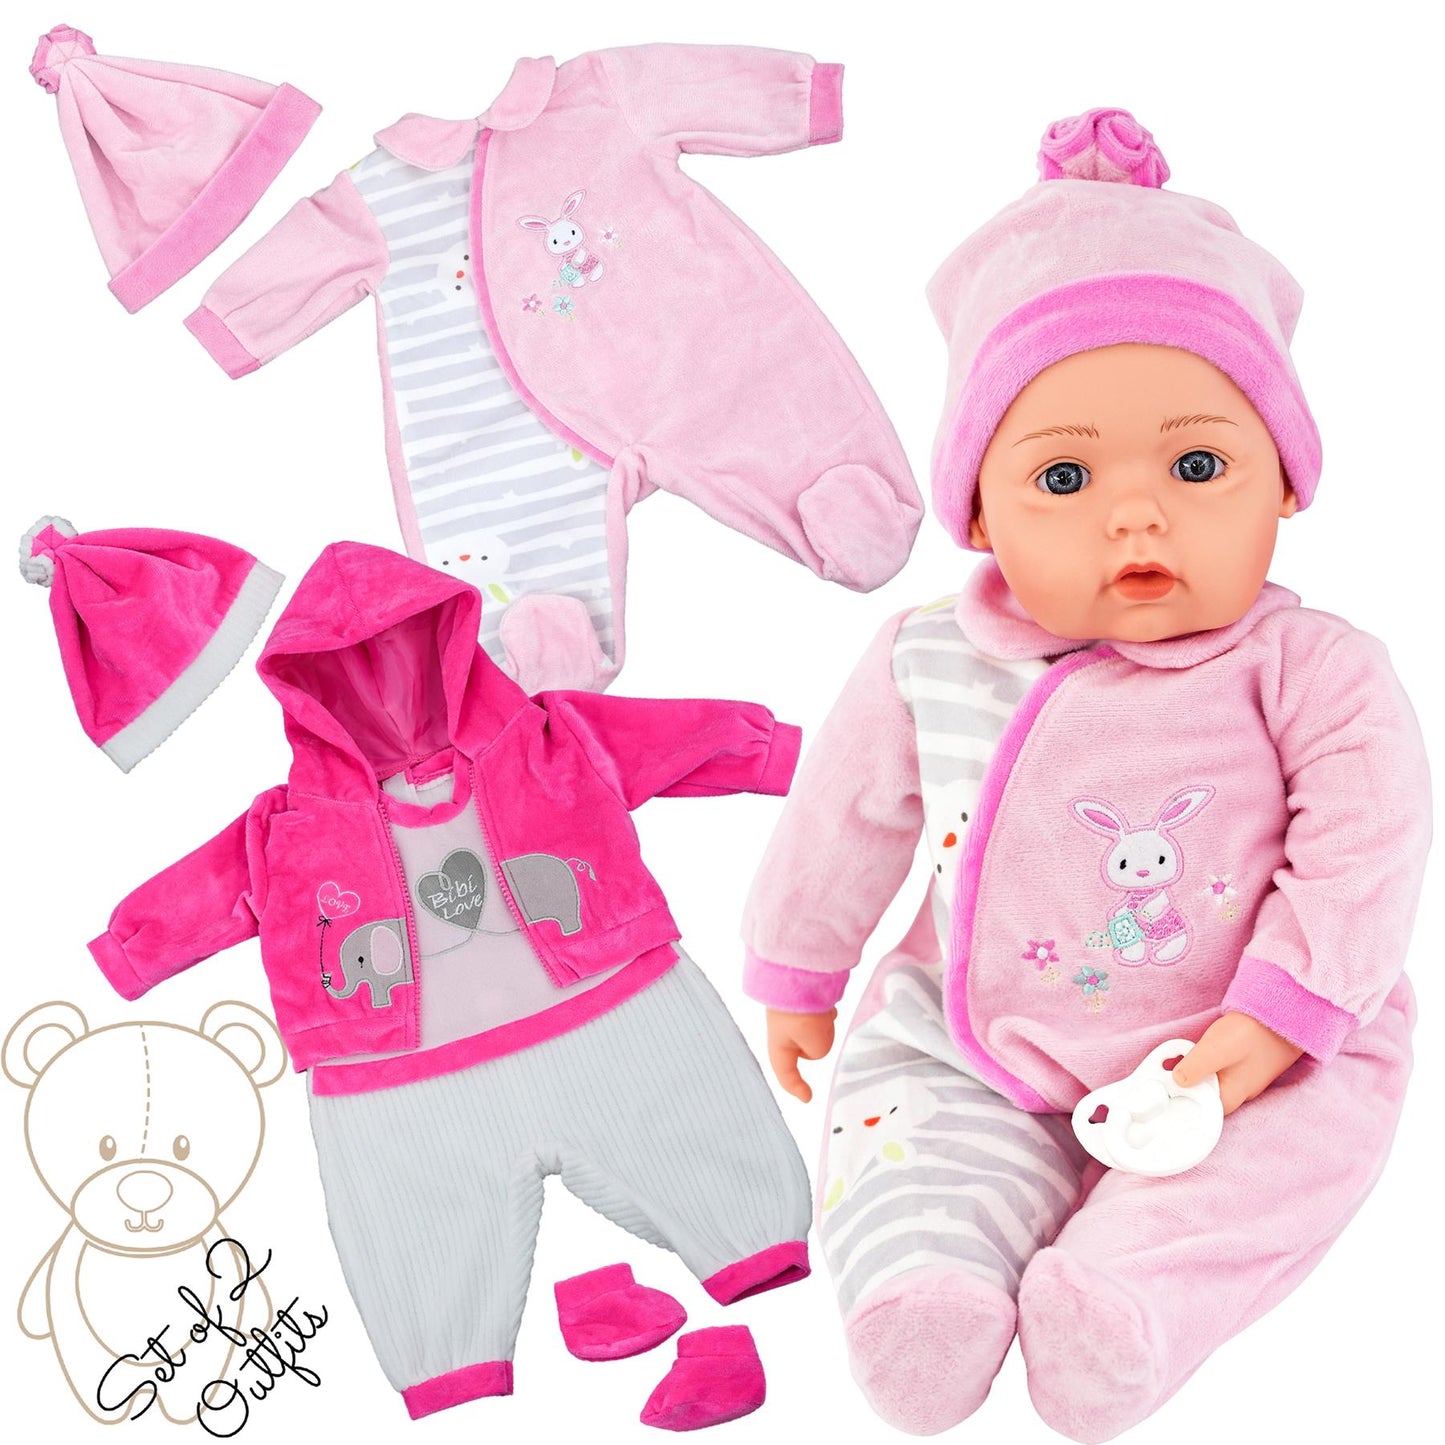 Baby Doll Clothes Set Of Two by BiBi Doll - UKBuyZone